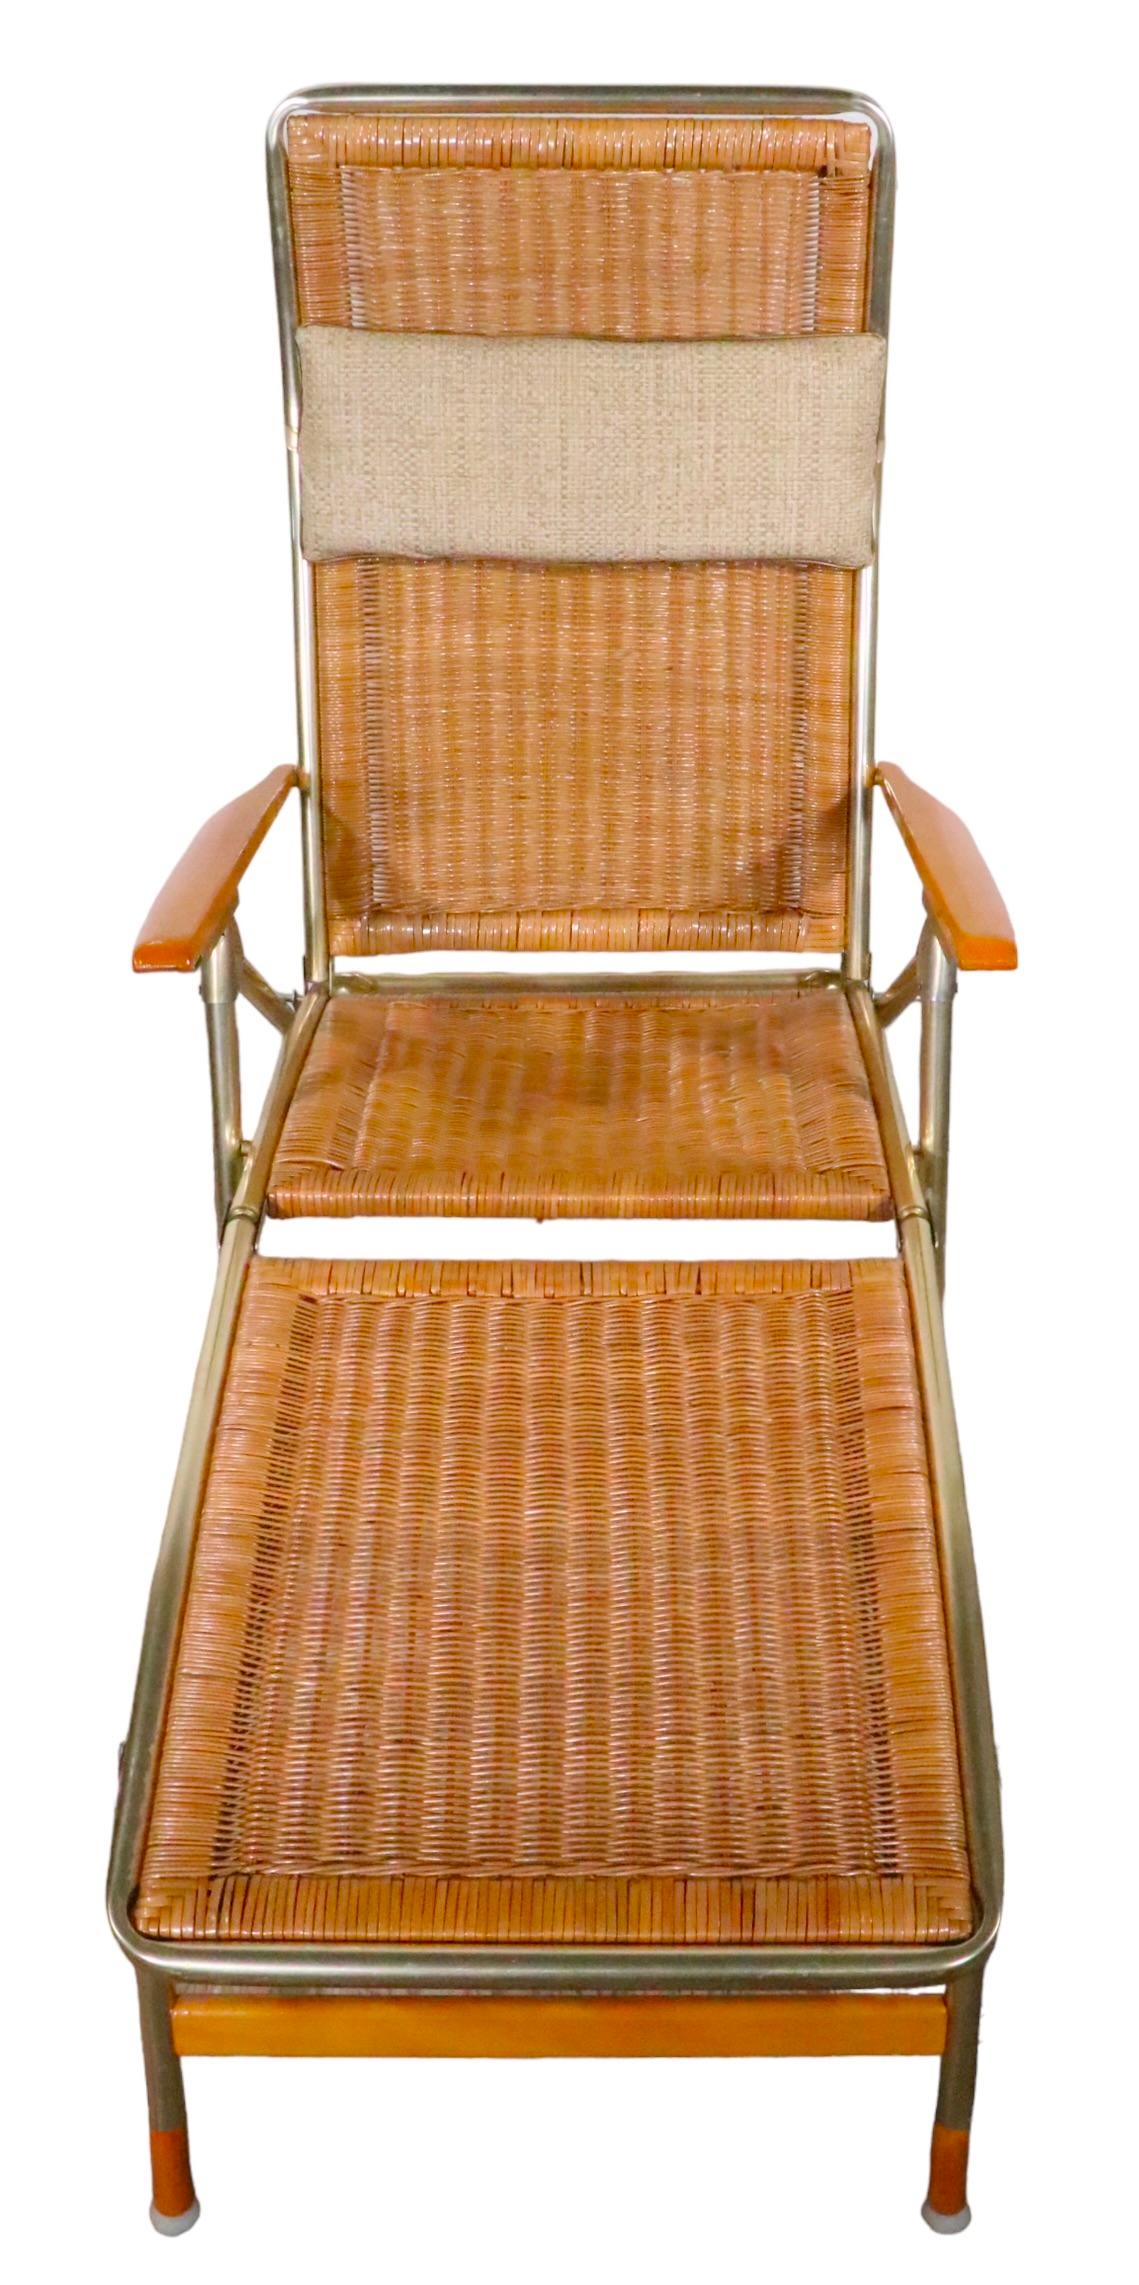 Mid Century Patio Poolside Folding Chaise Lounge by Telescope Chair Company  In Good Condition For Sale In New York, NY